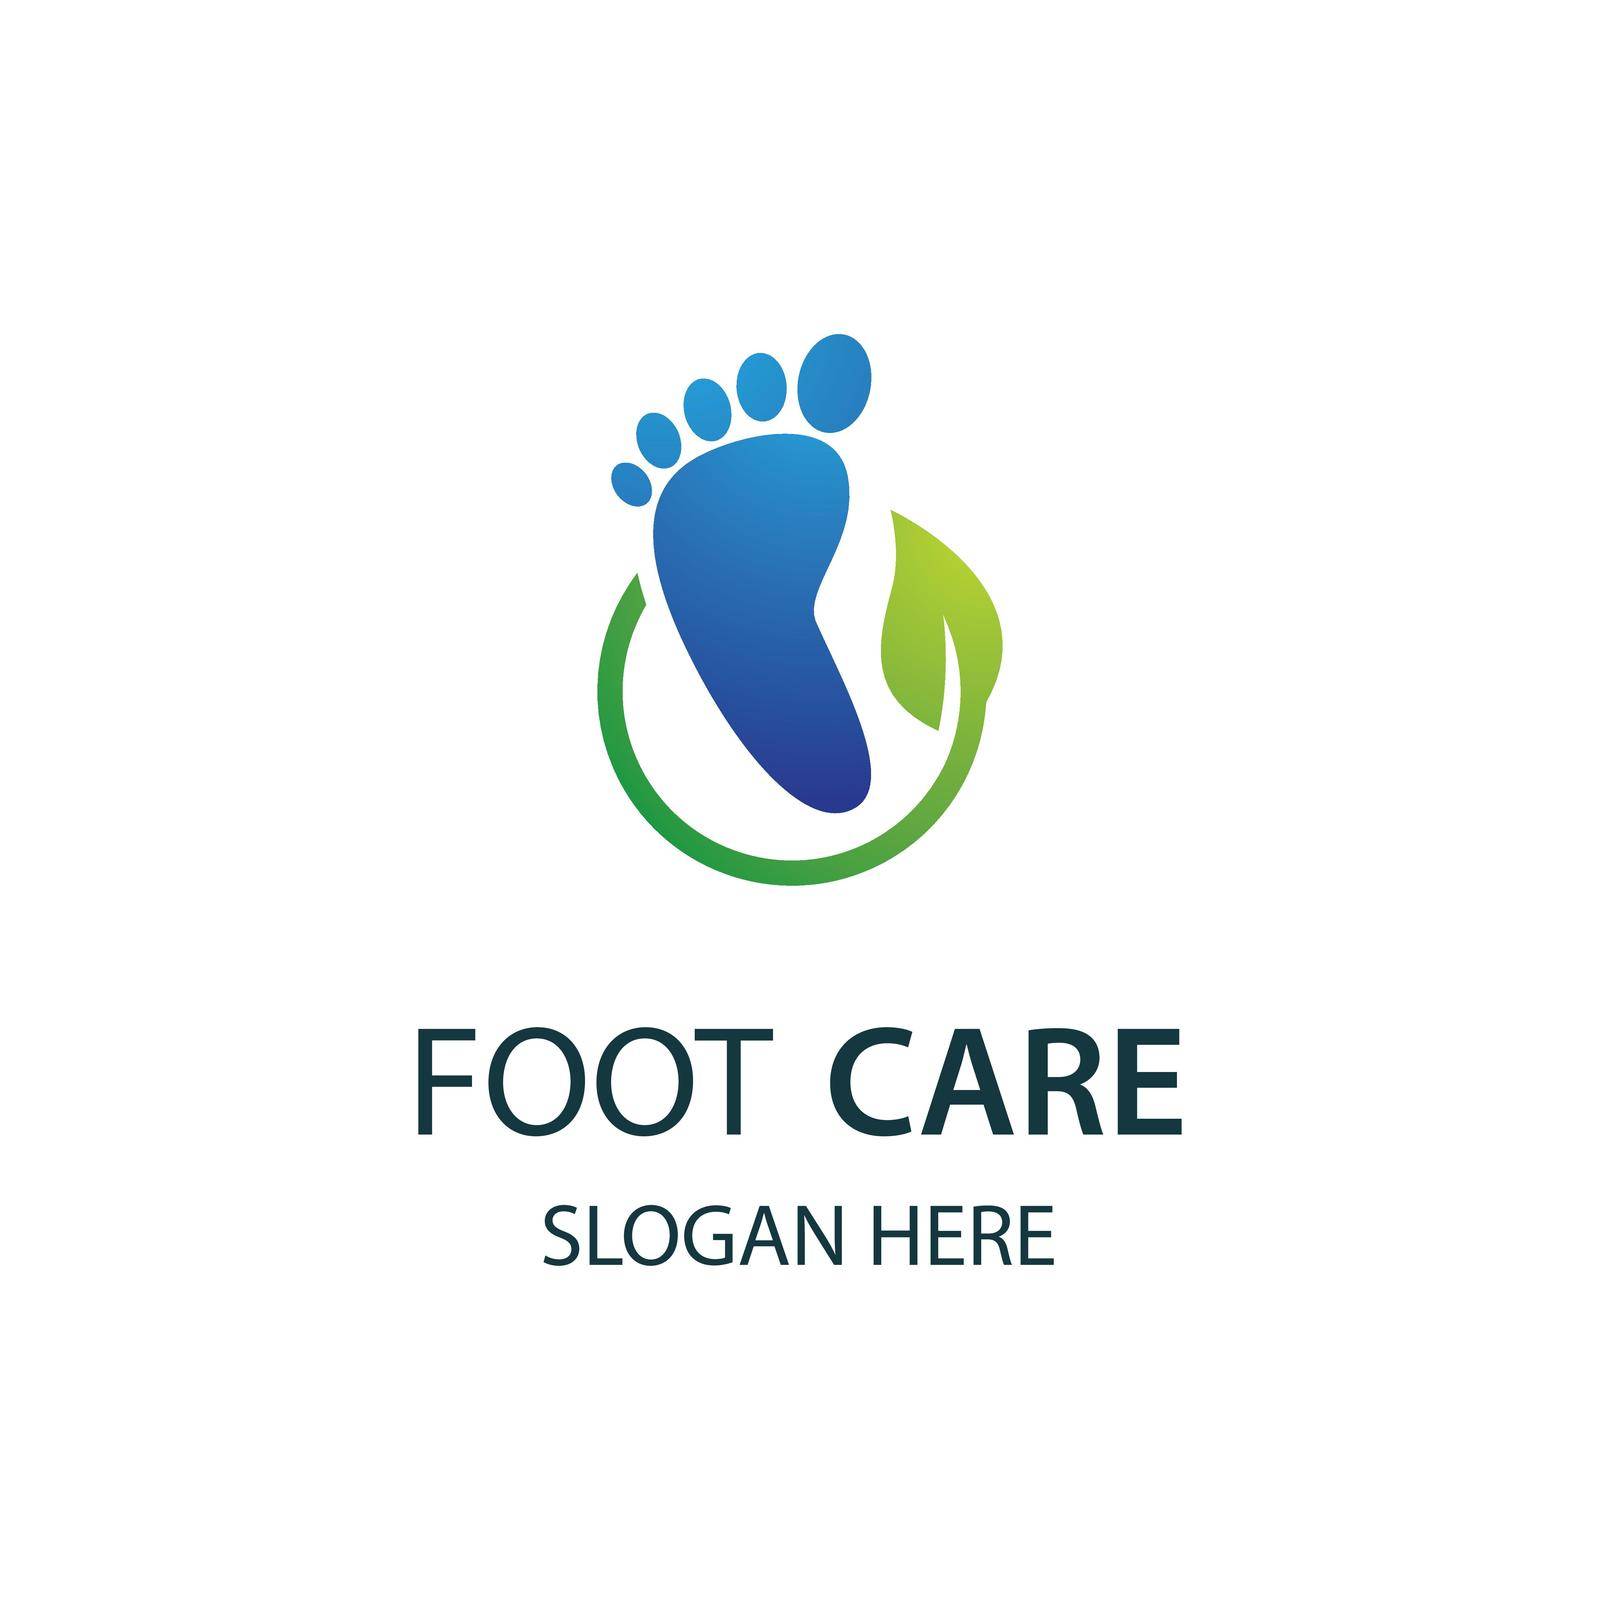 Foot care logo images by Attades19